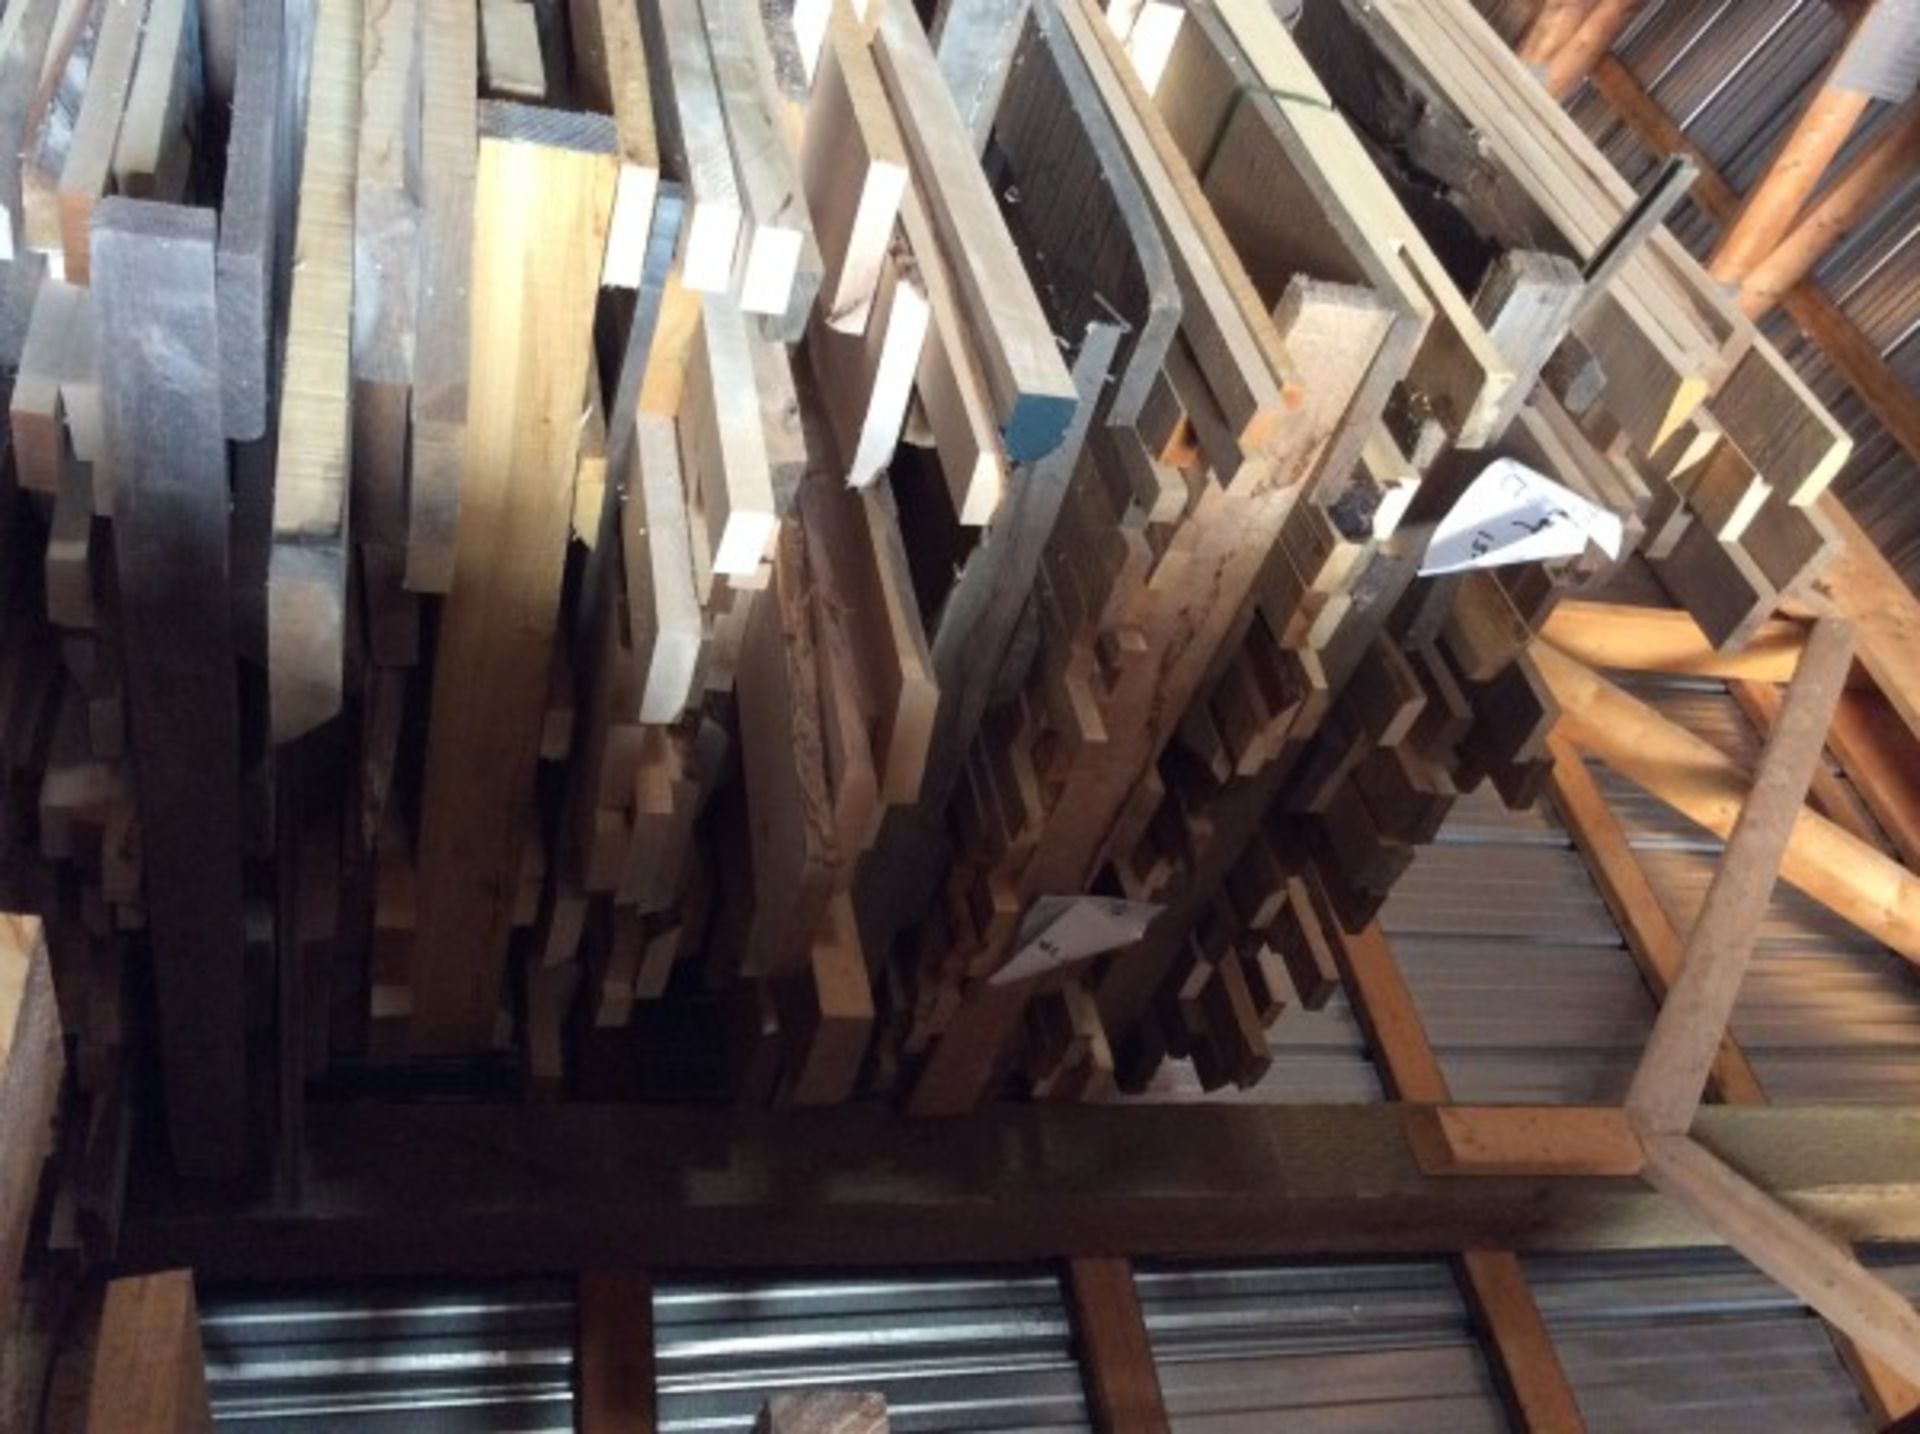 1 LIFT OF MIXED MAPLE & PINE BOARDS 8' L X 1-1.5" T X 2-6" W APROX 250 PCS - E - Image 2 of 2